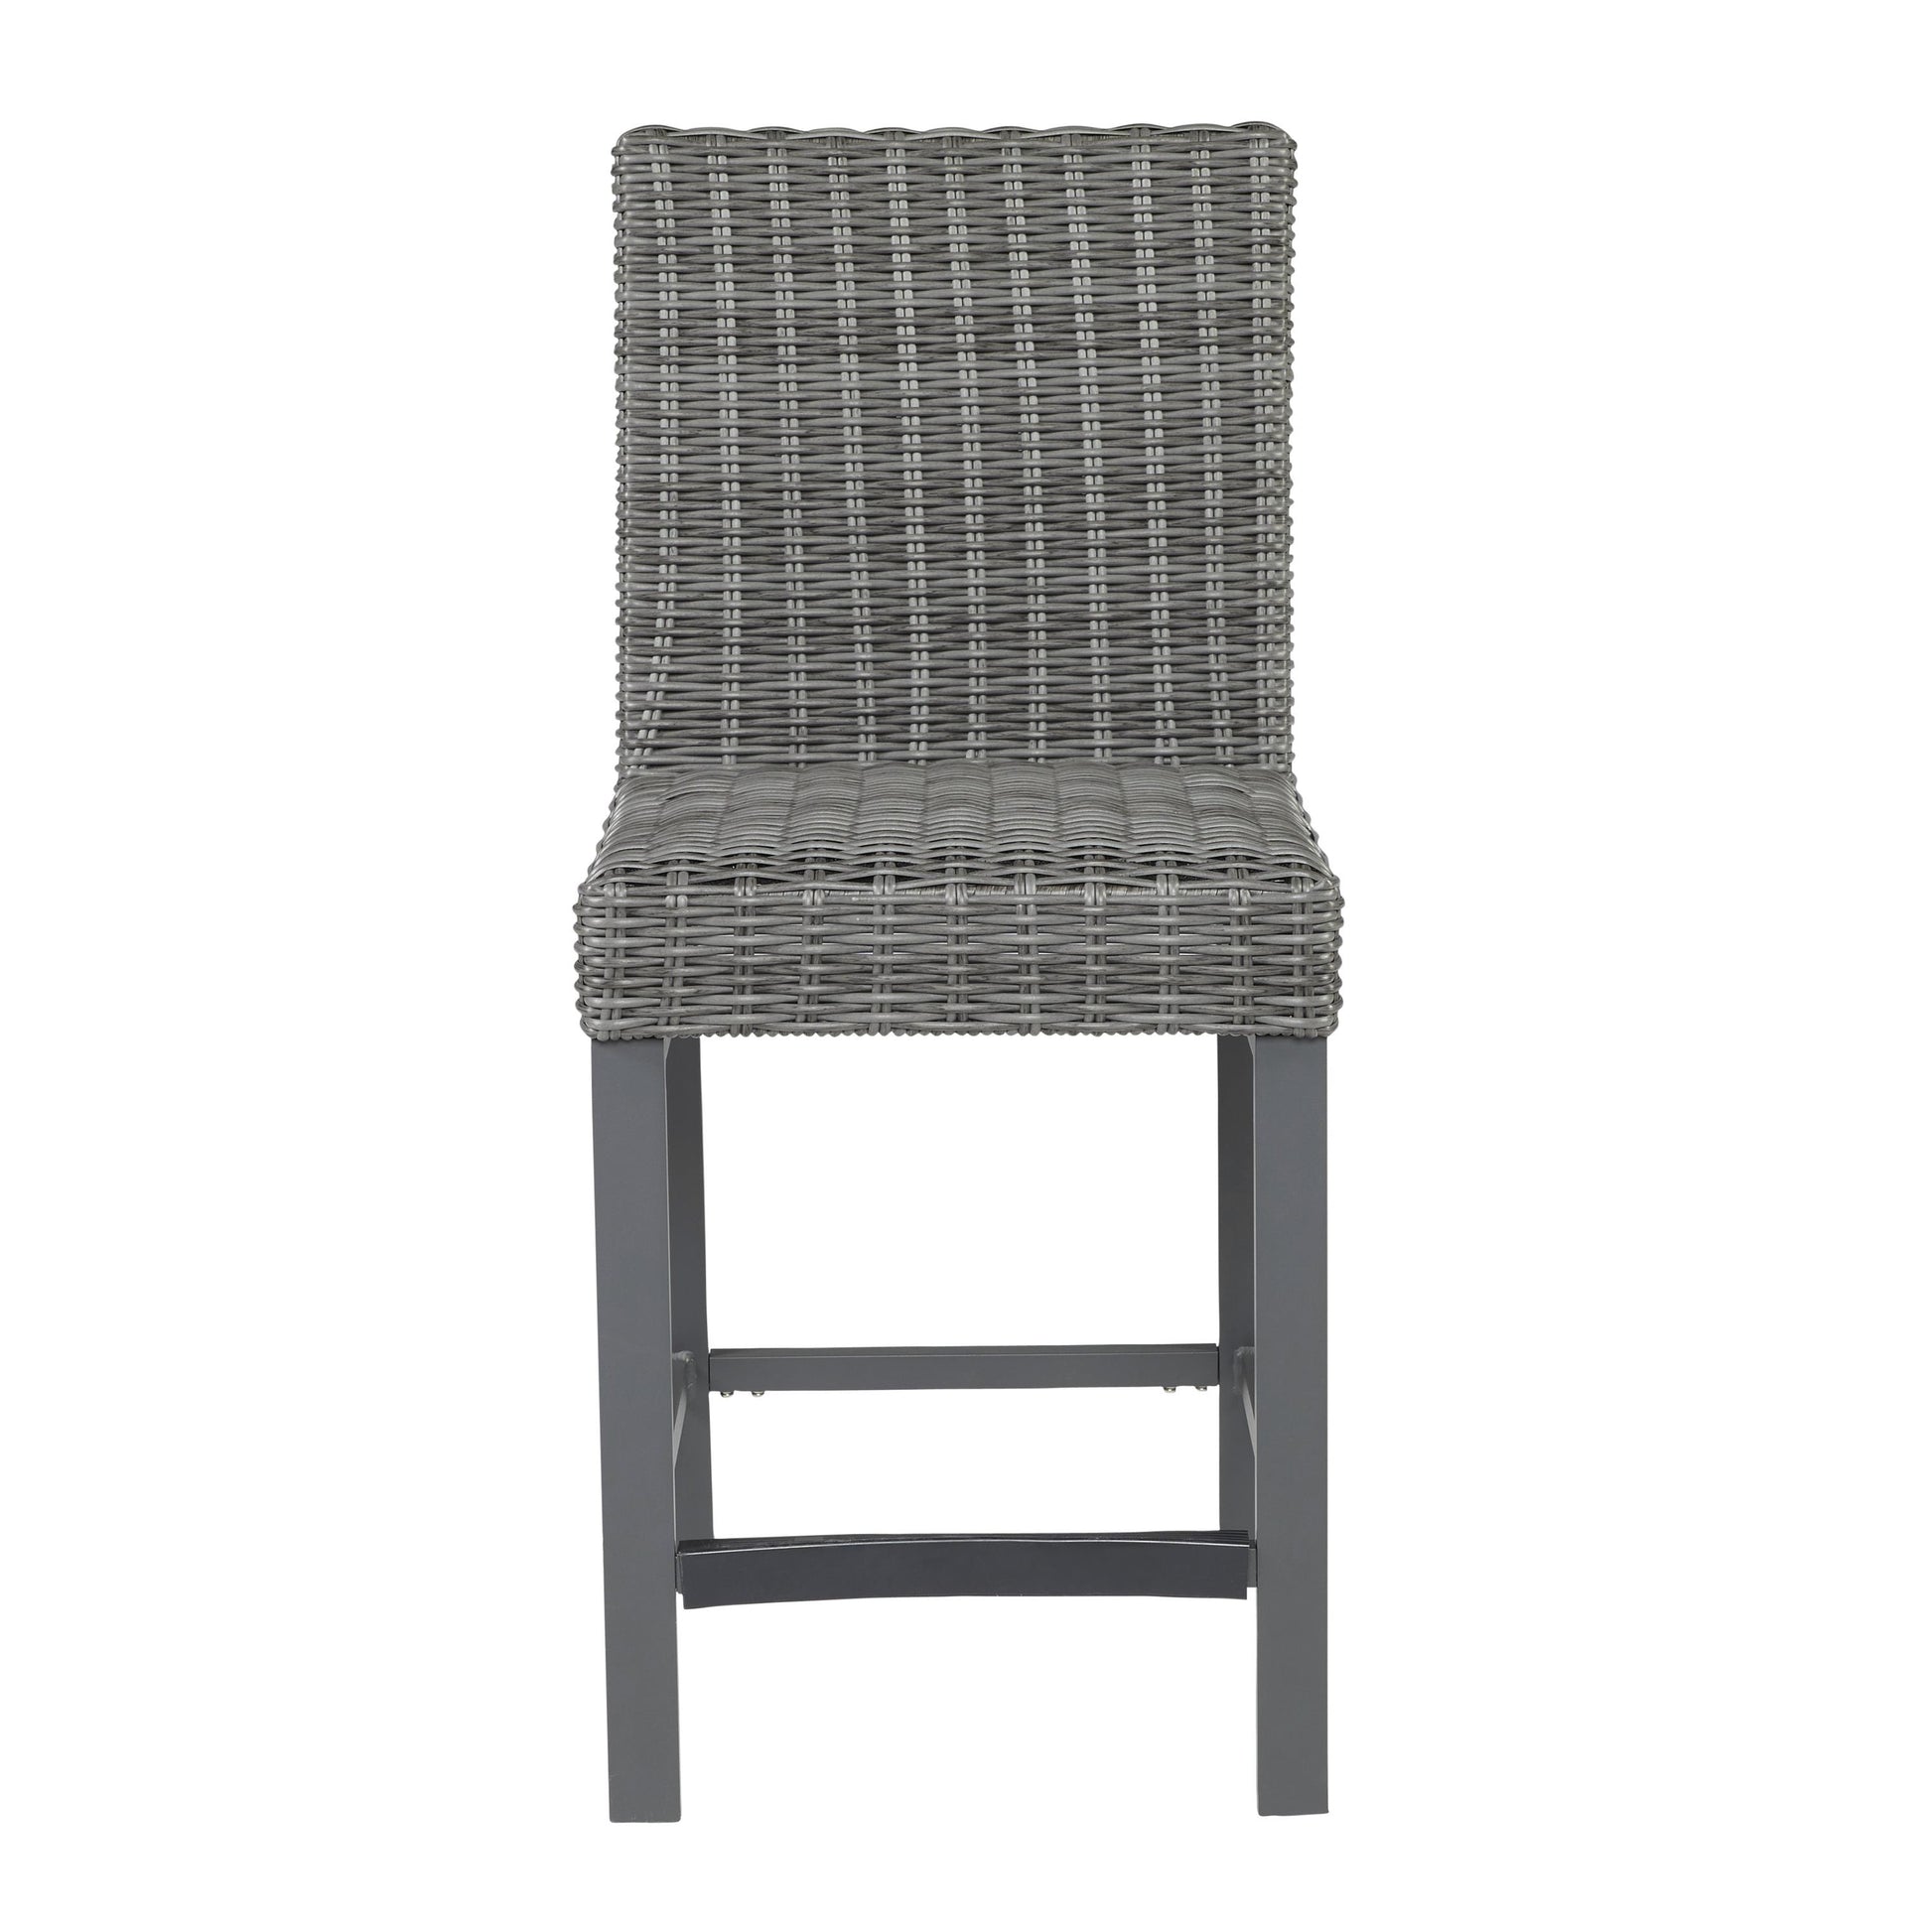 Signature Design by Ashley Outdoor Seating Stools P520-130 IMAGE 2